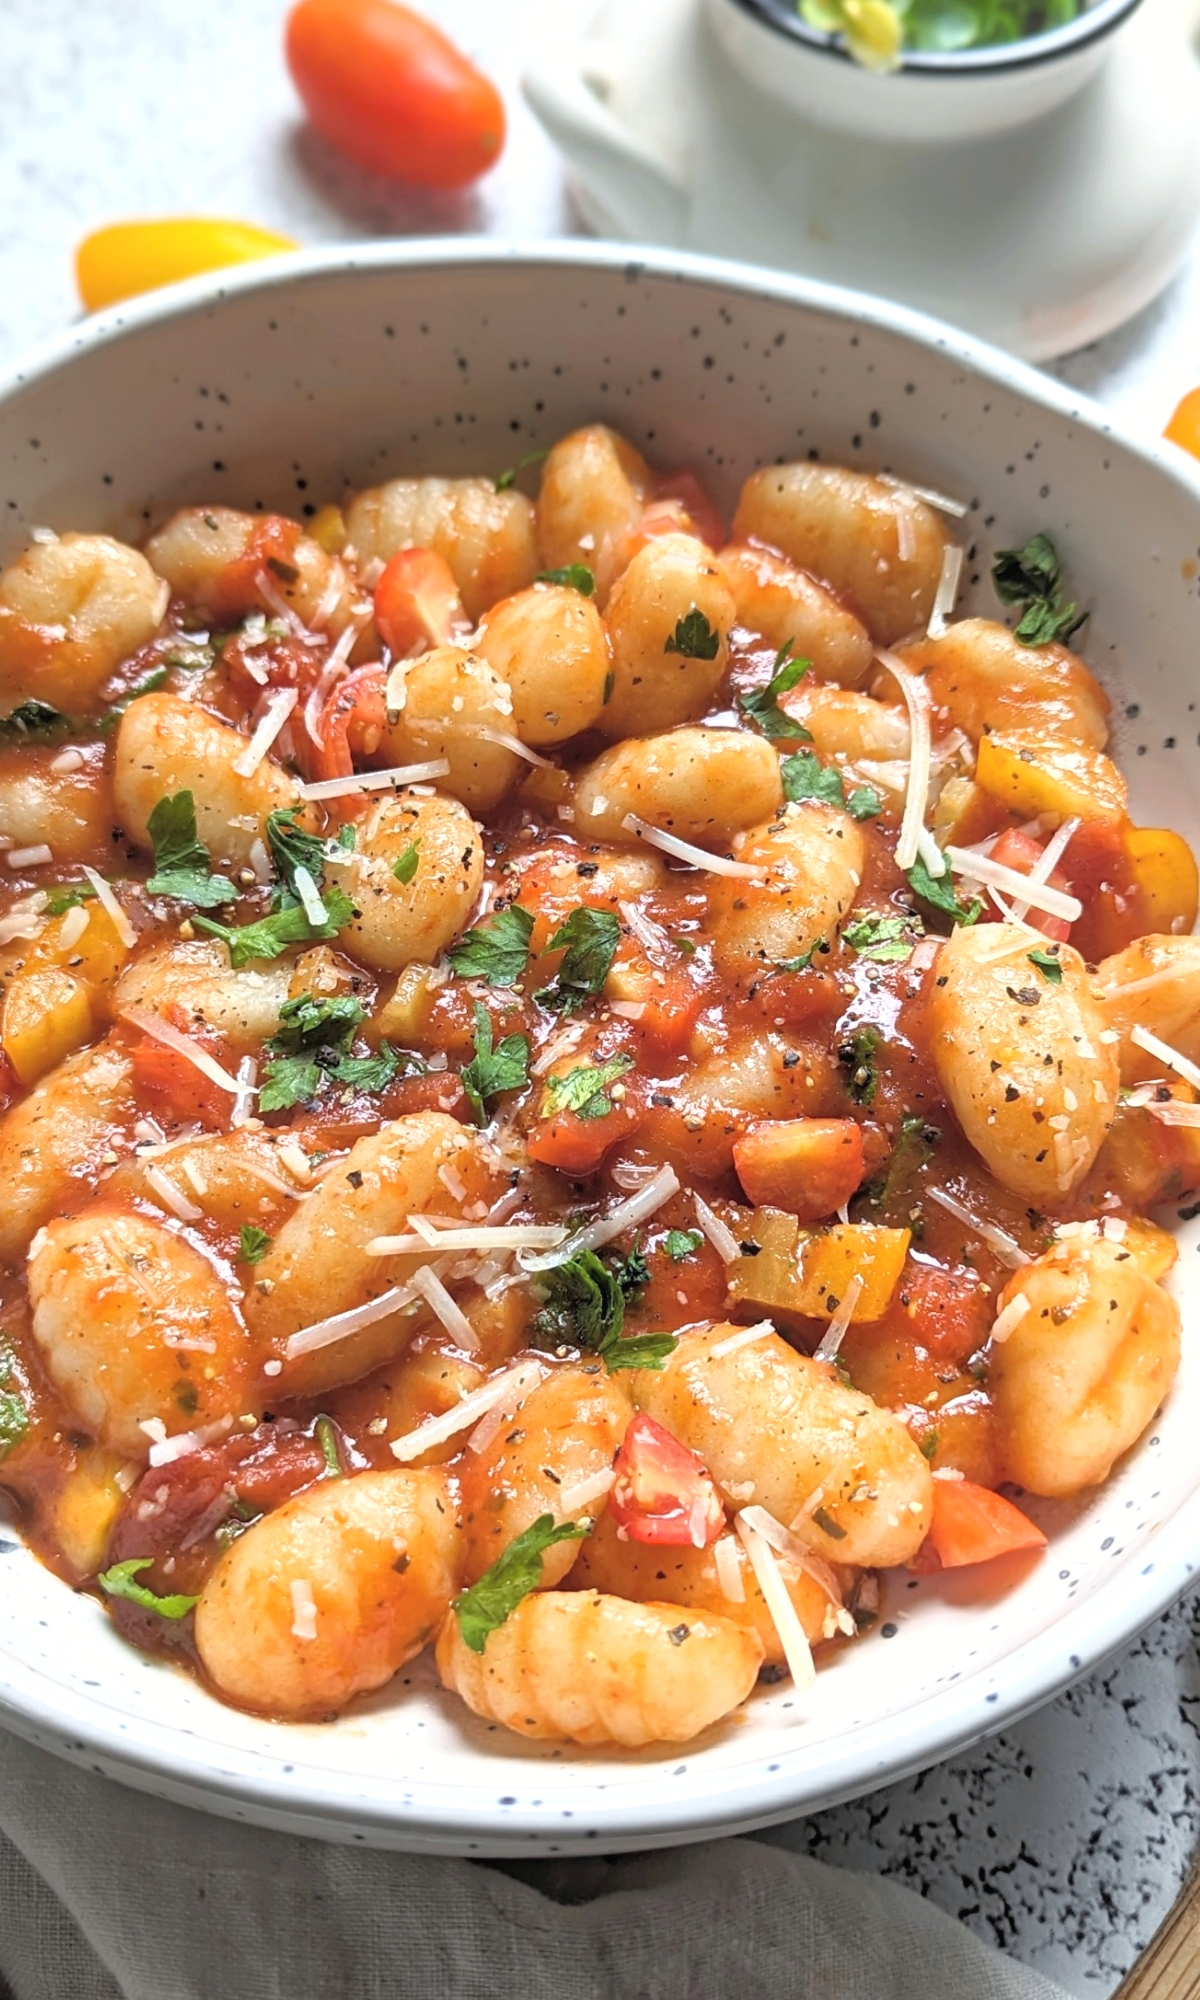 gnocchi with tomato sauce parsley parmesan cheese garlic cherry tomatoes and san marzano canned tomatoes